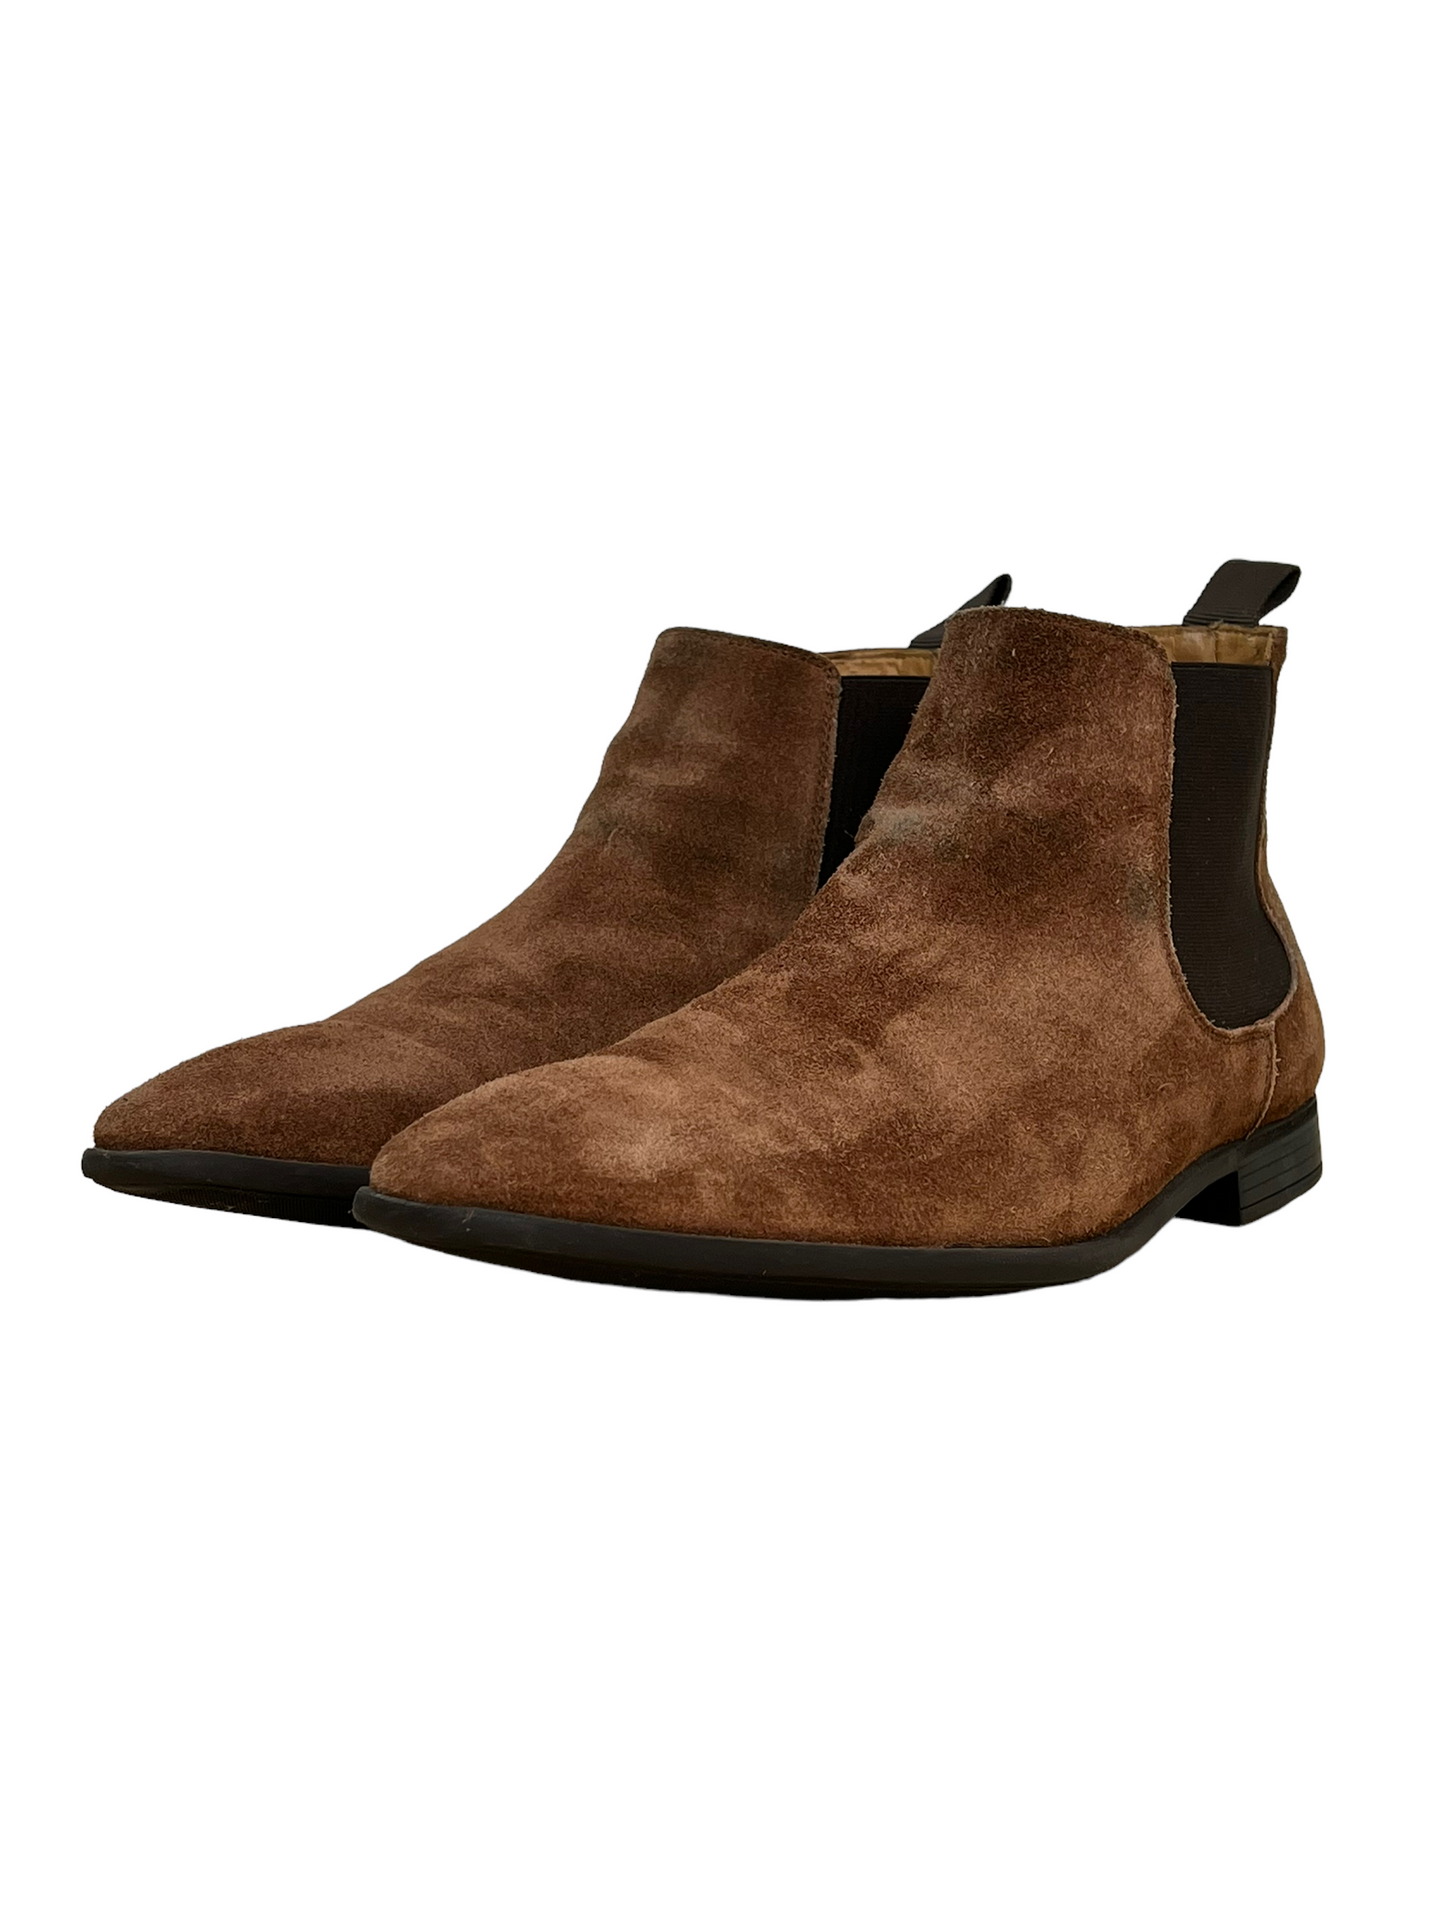 Paul Smith Chestnut Suede Falconer Ankle Chelsea Boot - Genuine Design Luxury Consignment for Men. New & Pre-Owned Clothing, Shoes, & Accessories. Calgary, Canada